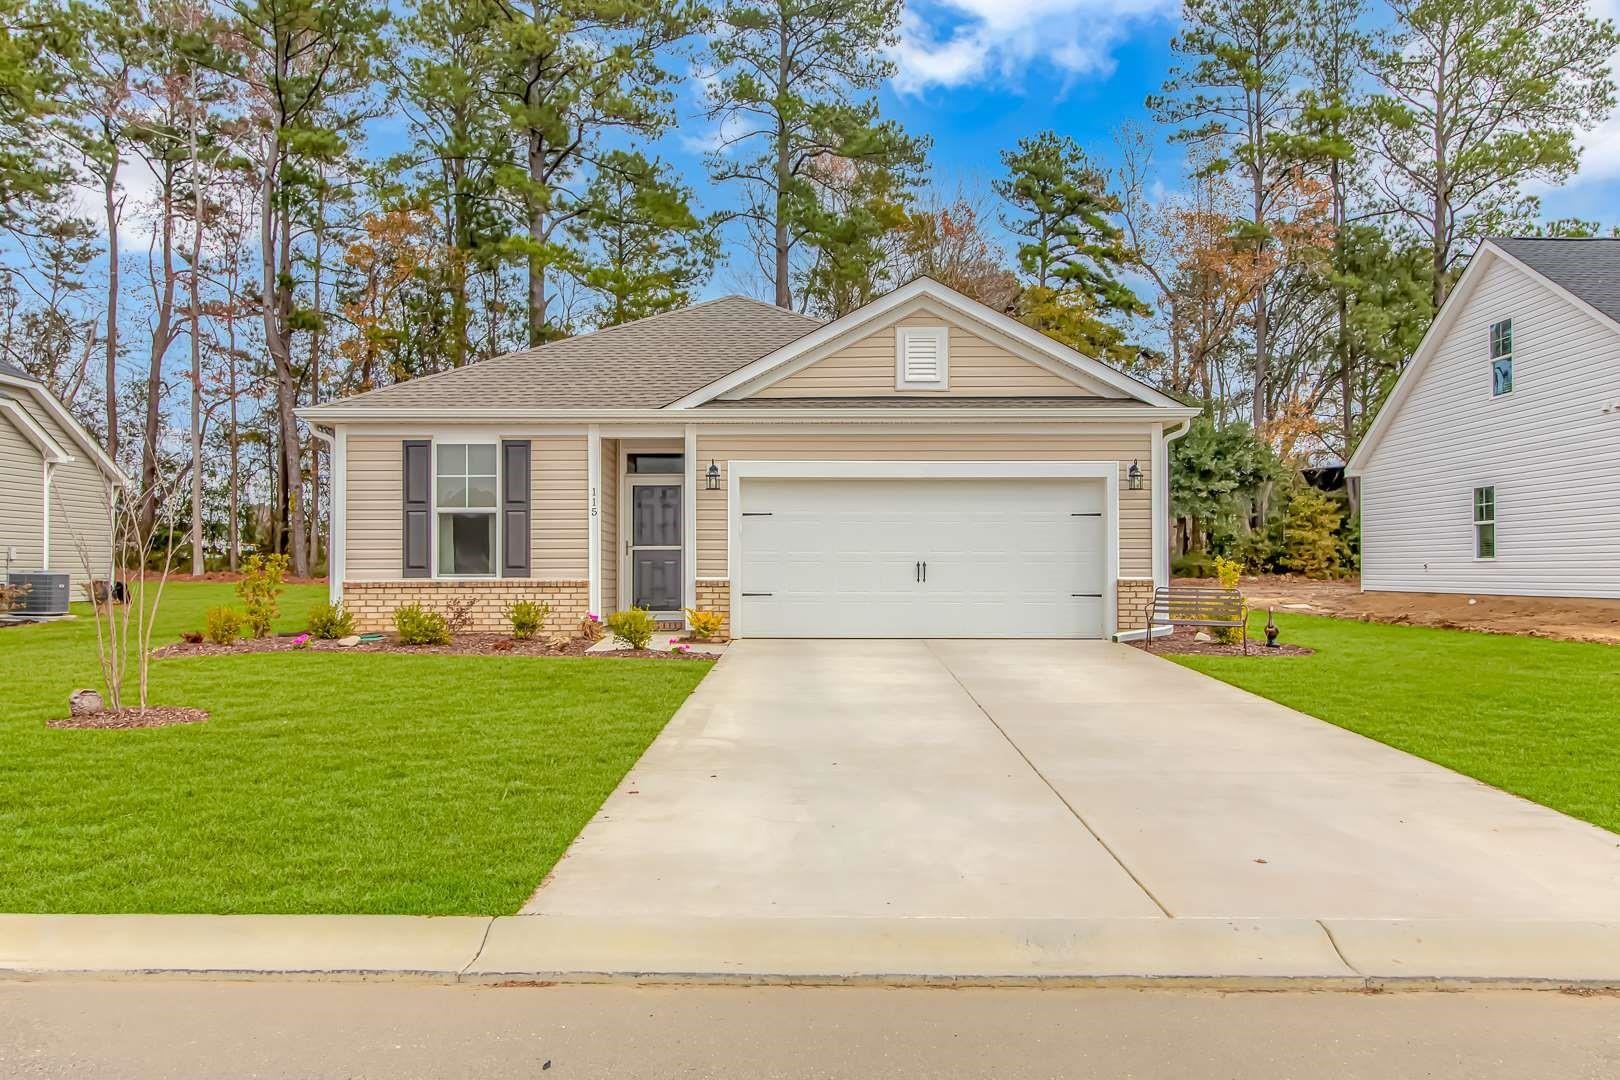 115 Grissett Lake Dr. Conway, SC 29526